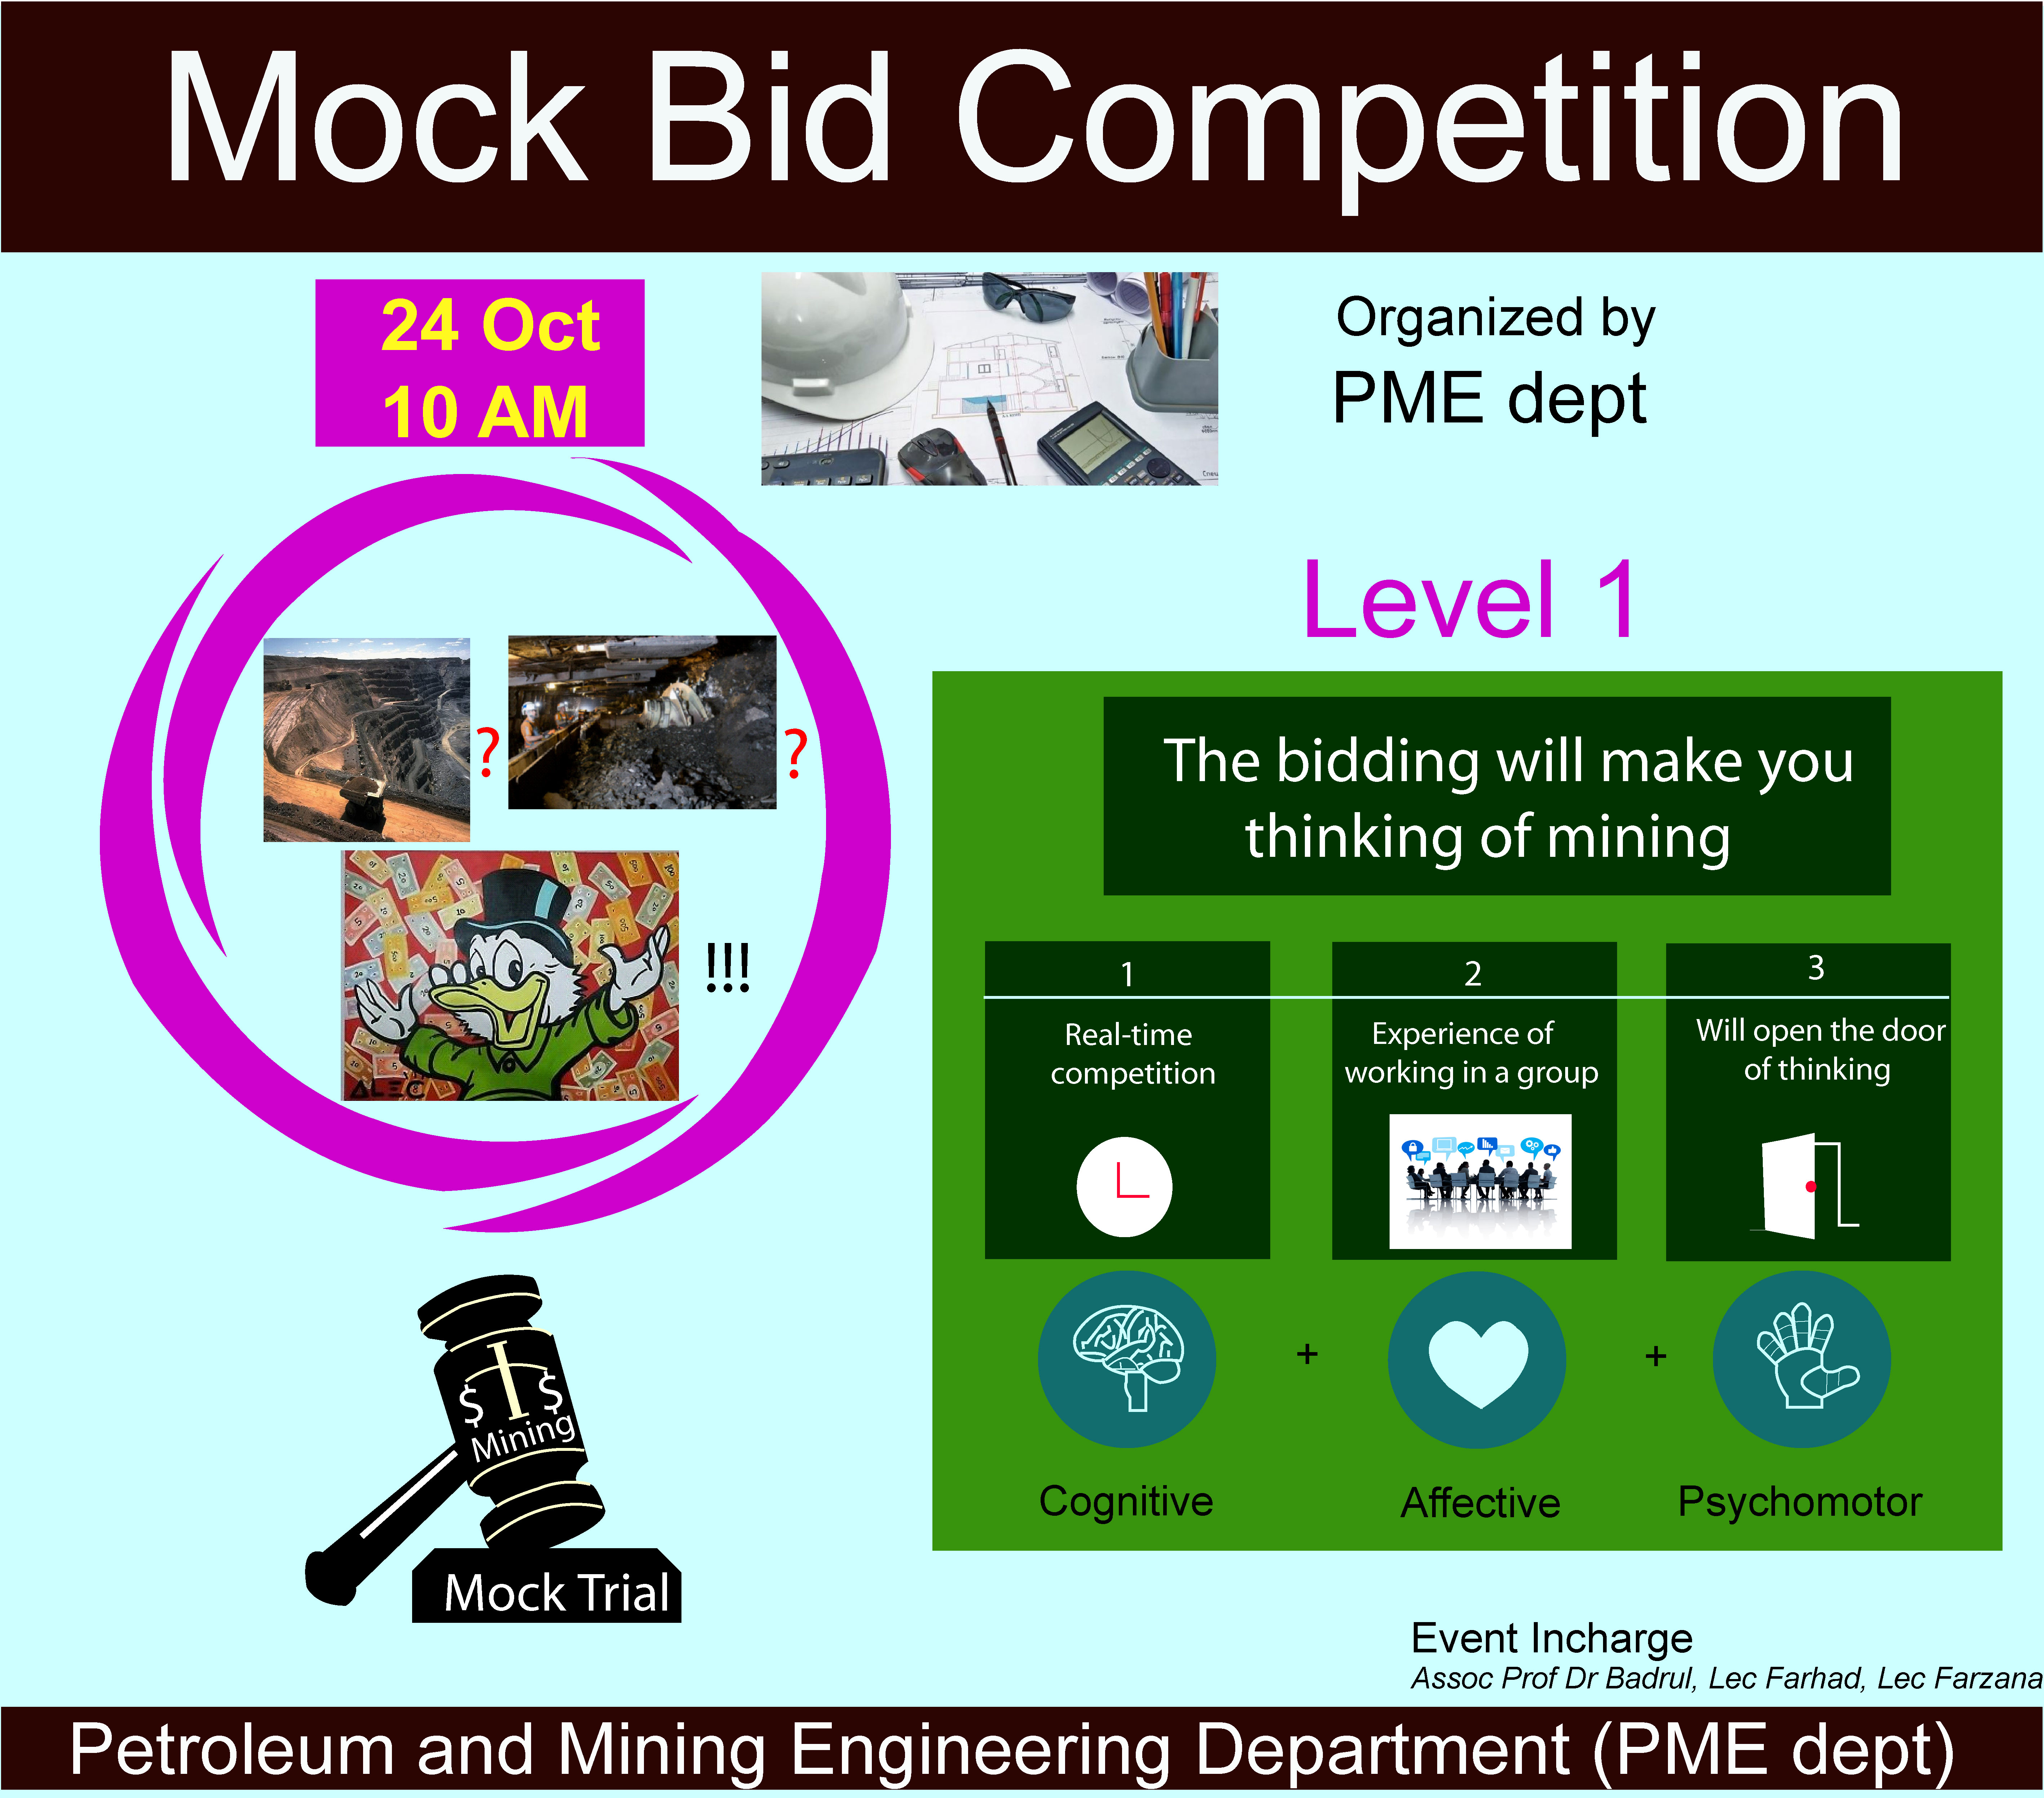 "Mock Bid Competition" organized by Department of Petroleum and Mining Engineering